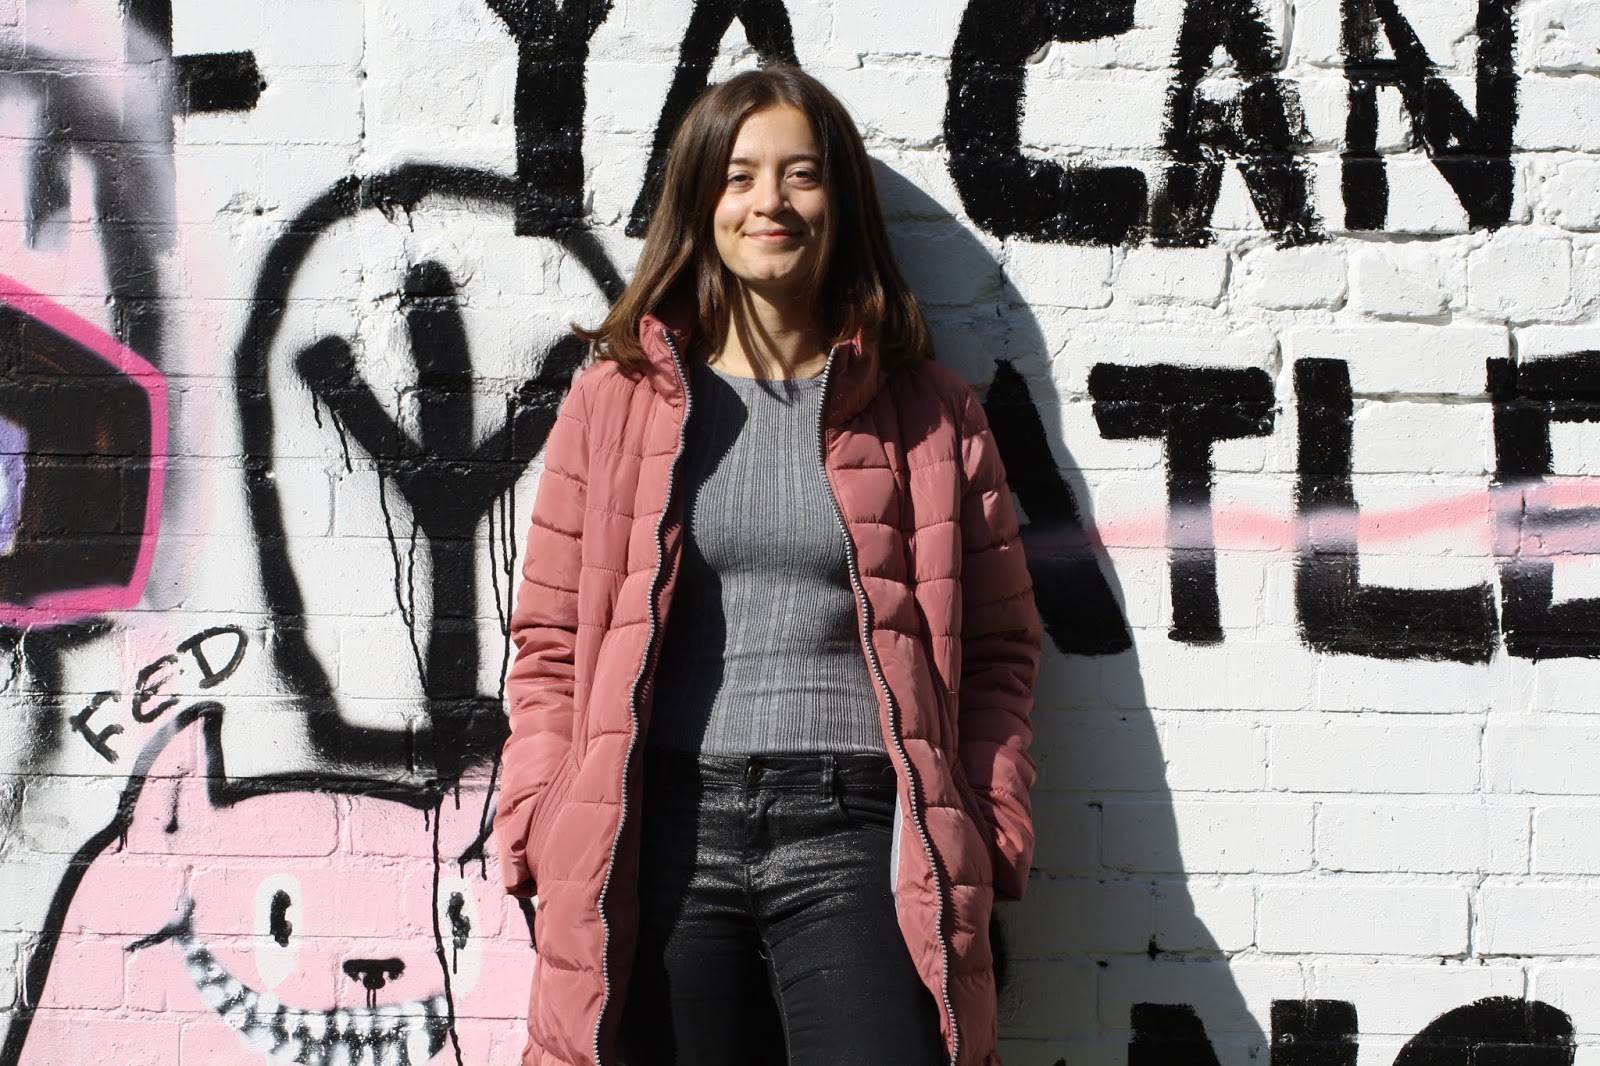 Abbey, leaning against a graffiti wall, smiles at the camera, hands in pockets